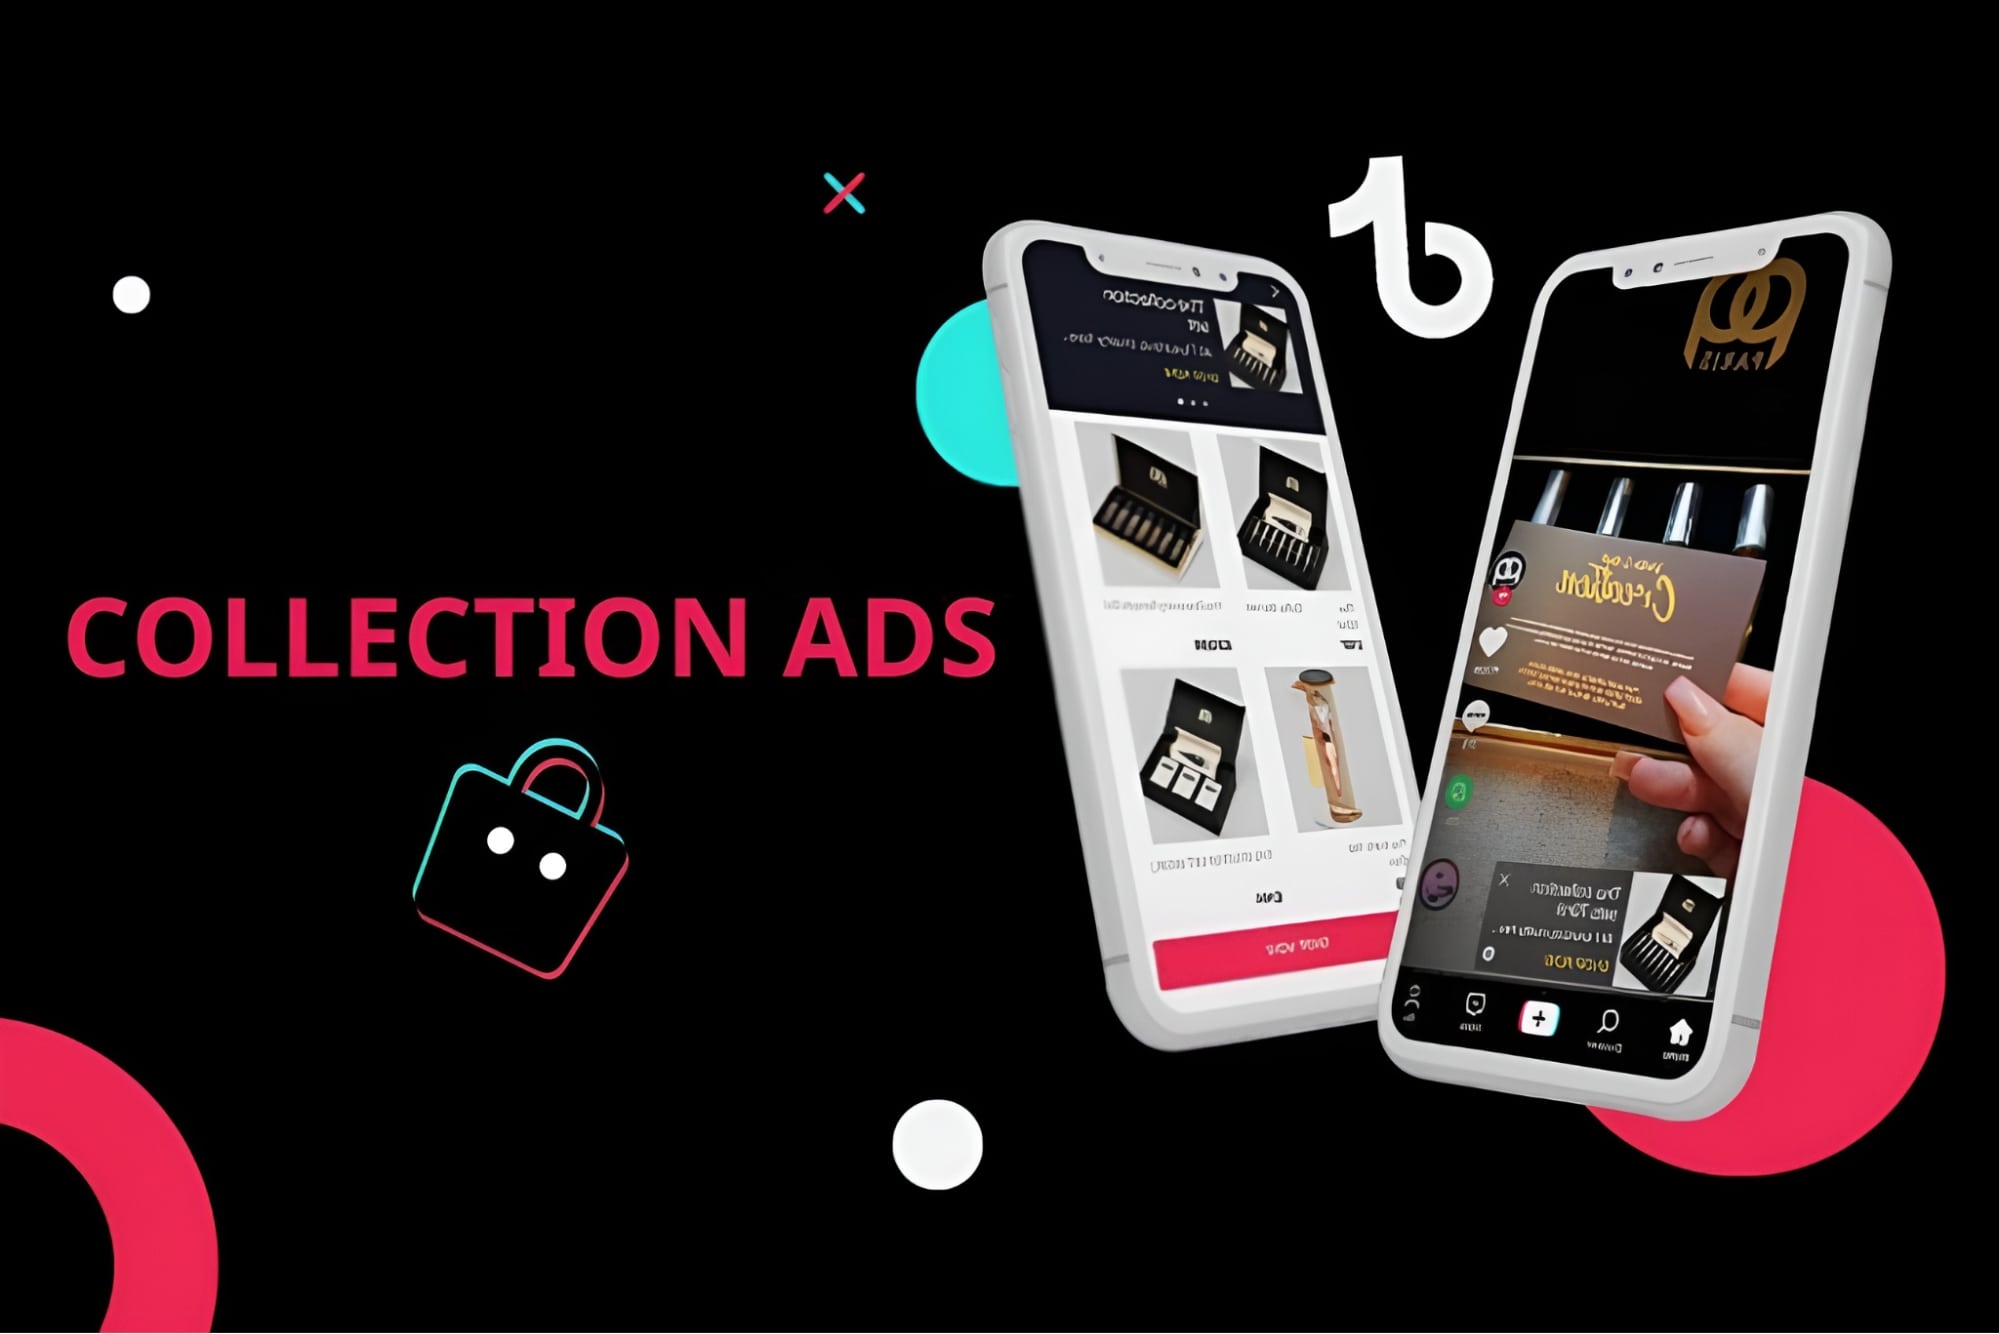 COLLECTION ADS